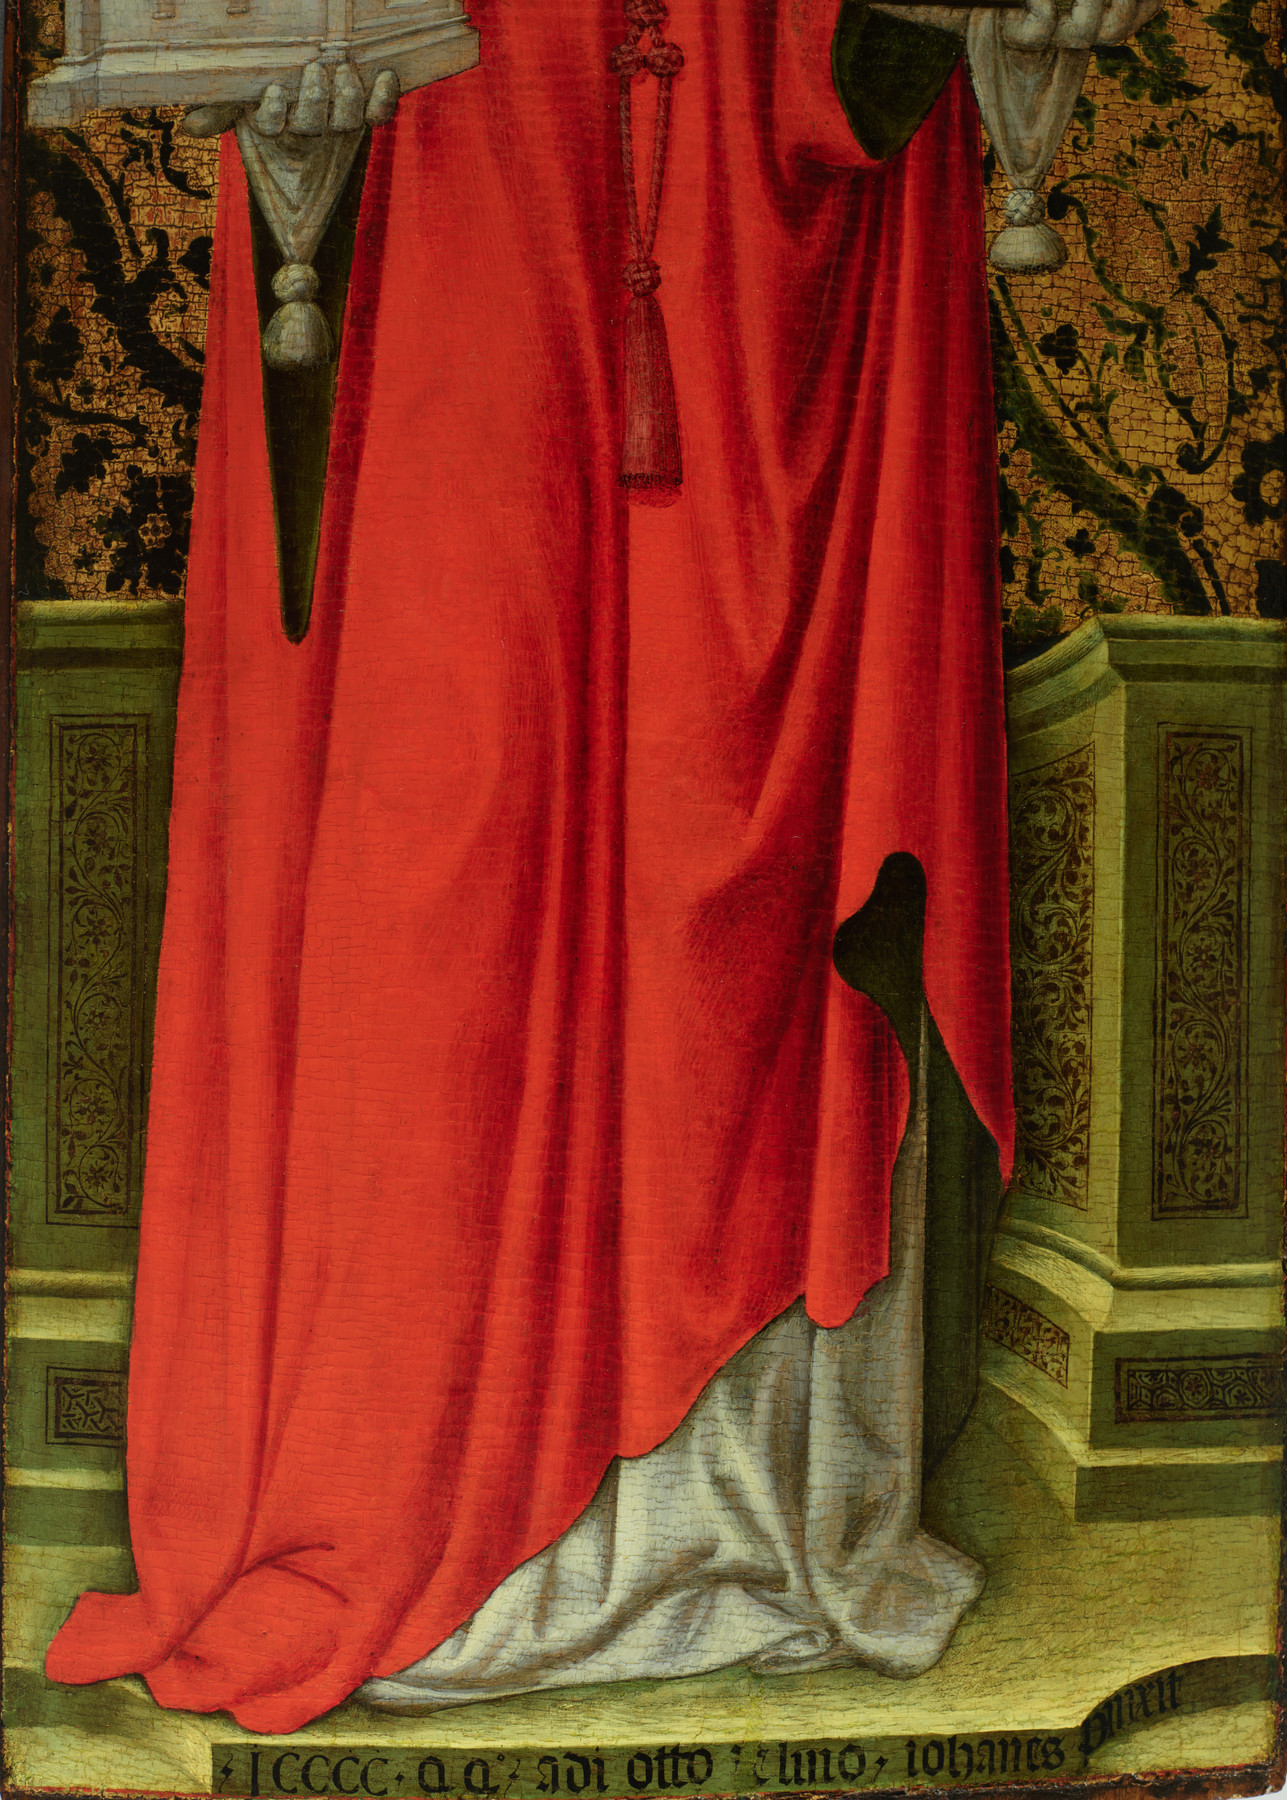 Image for St. Jerome